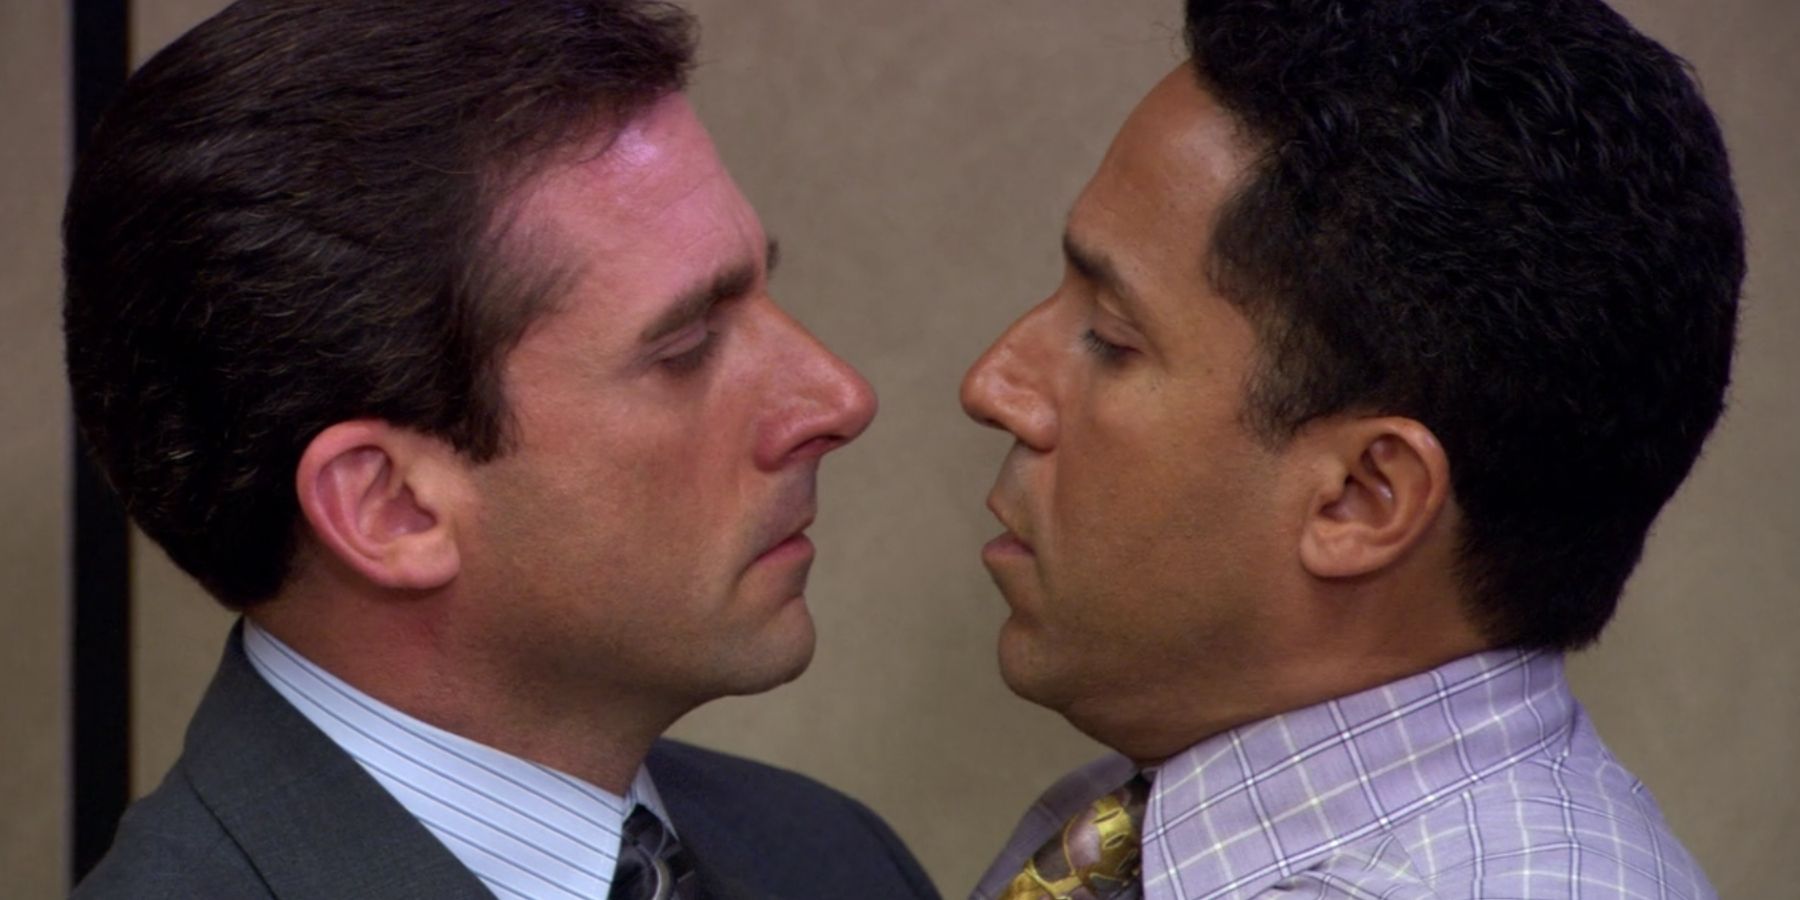 15 Funniest Scenes From The Office You Wont Believe Werent Scripted